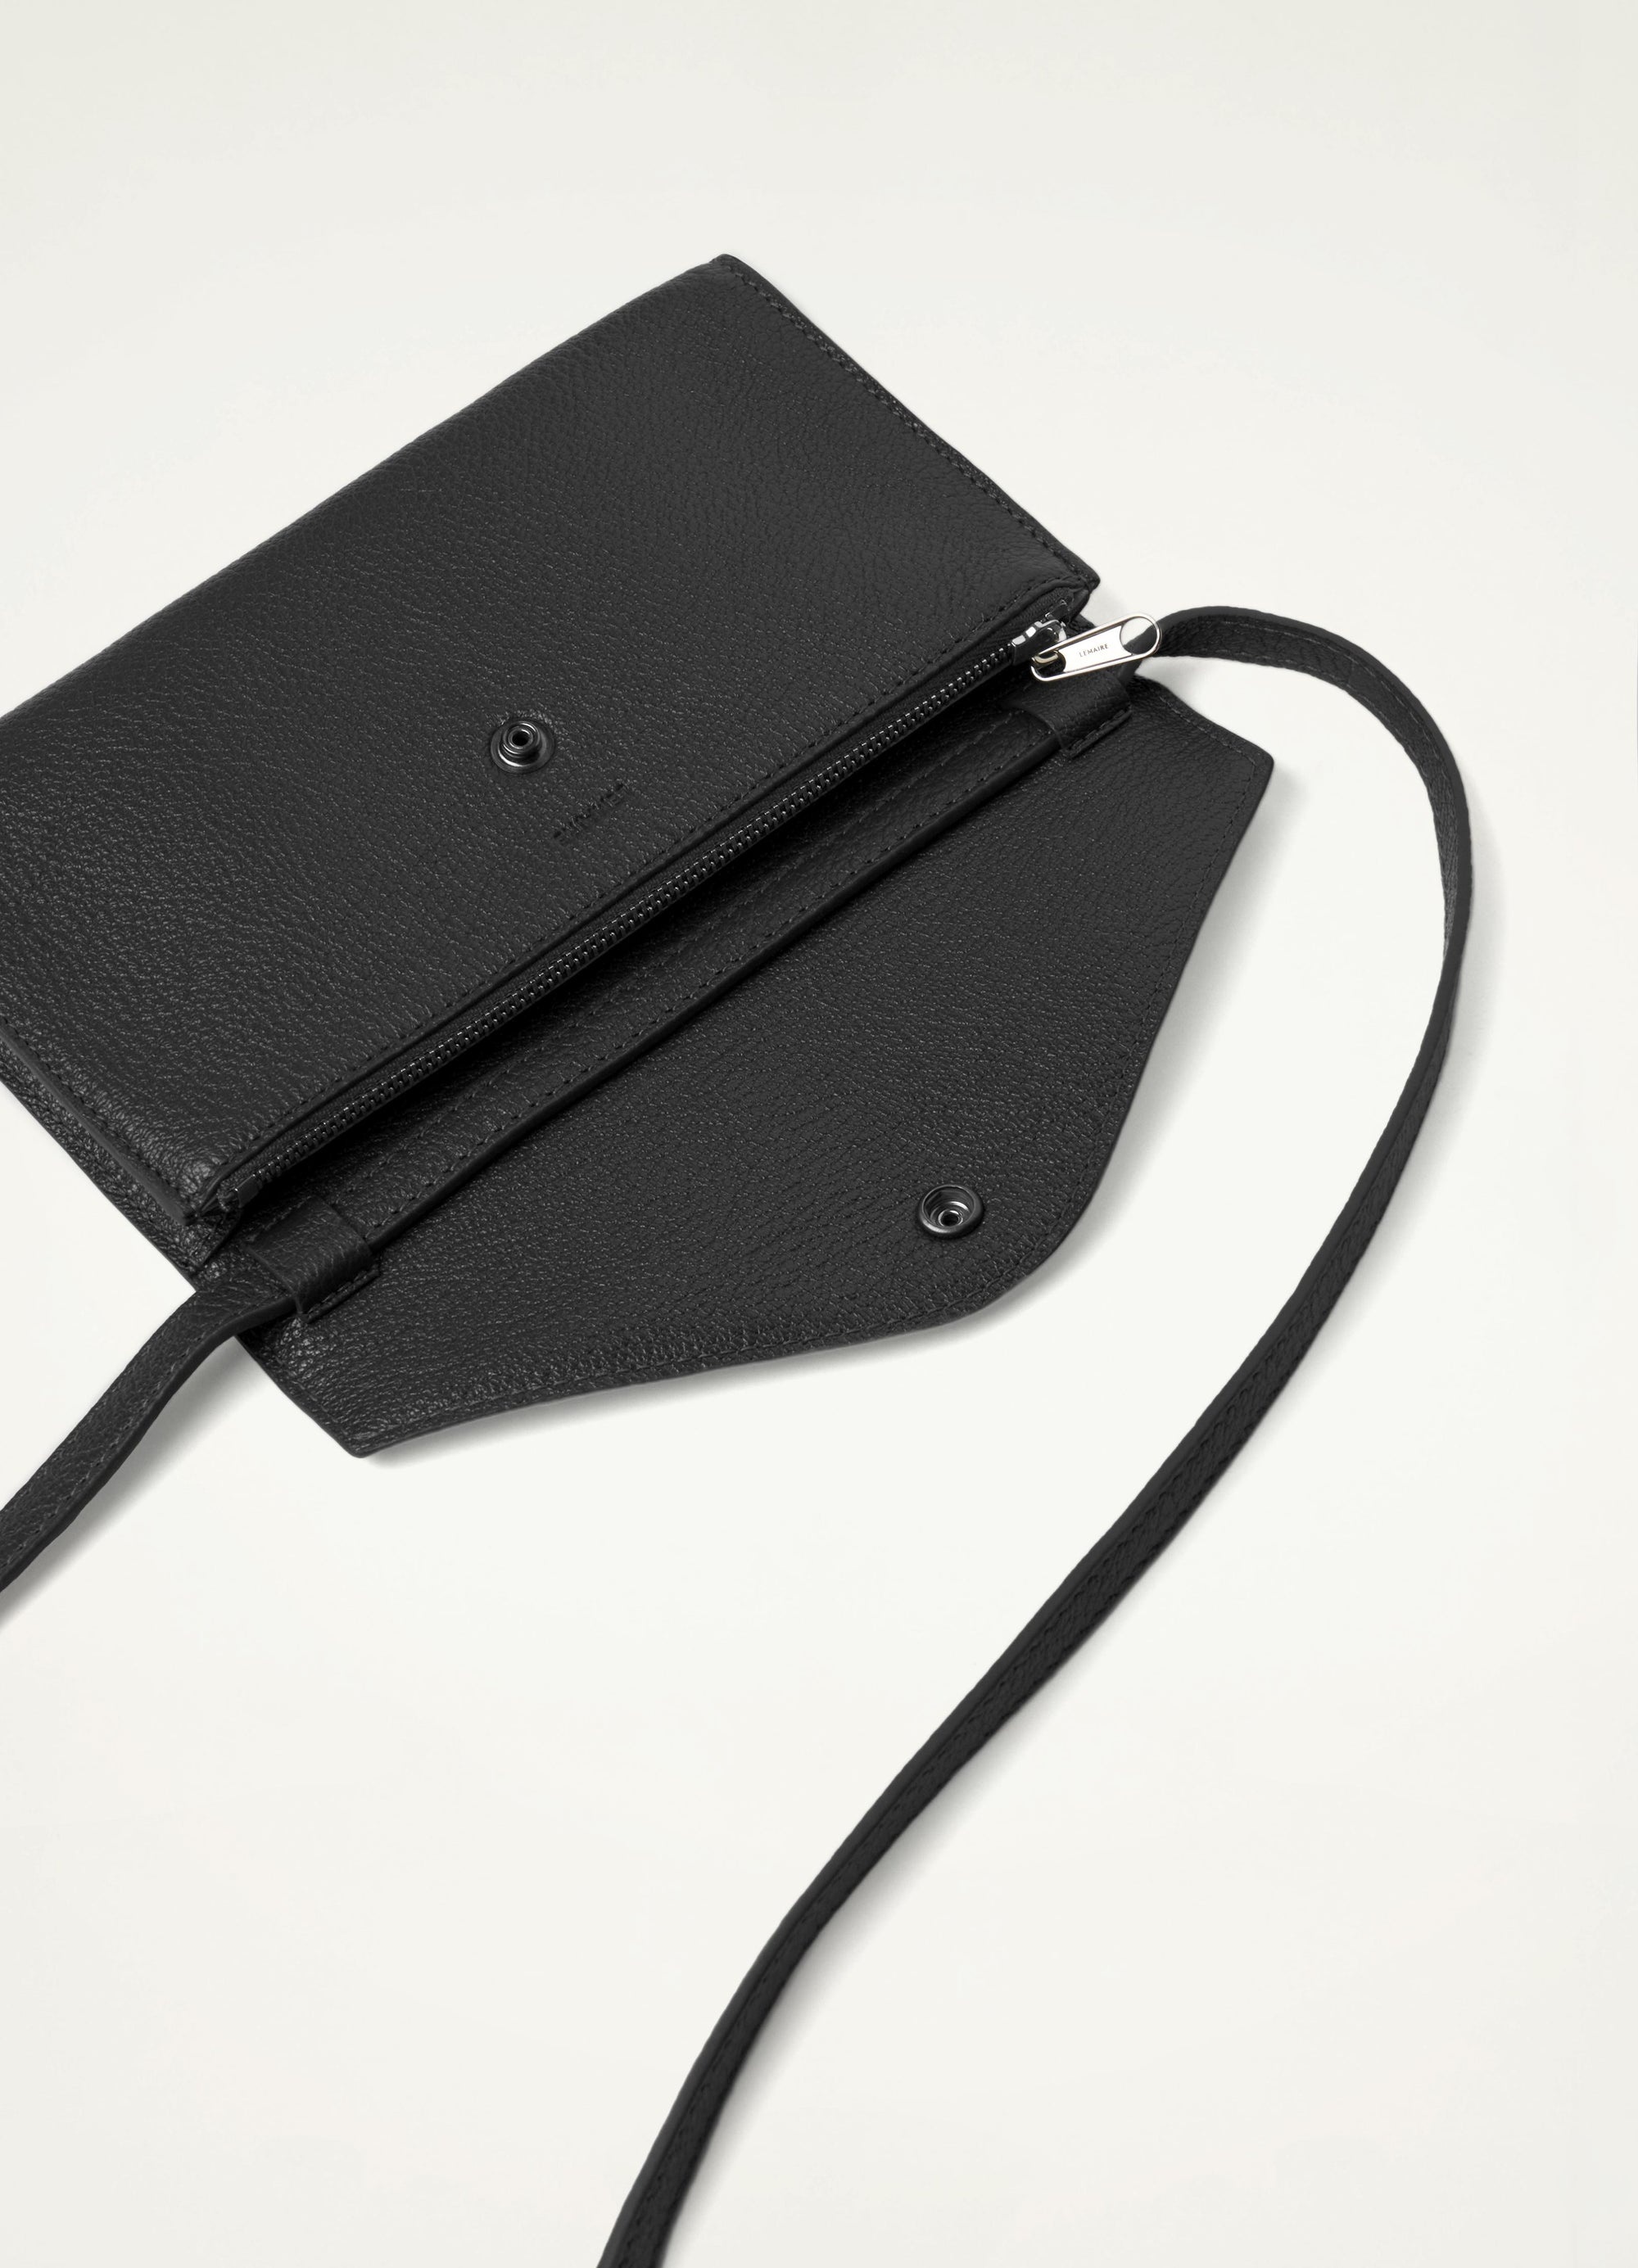 ENVELOPPE CONTINENTAL WALLET WITH STRAP
GOAT LEATHER - 2